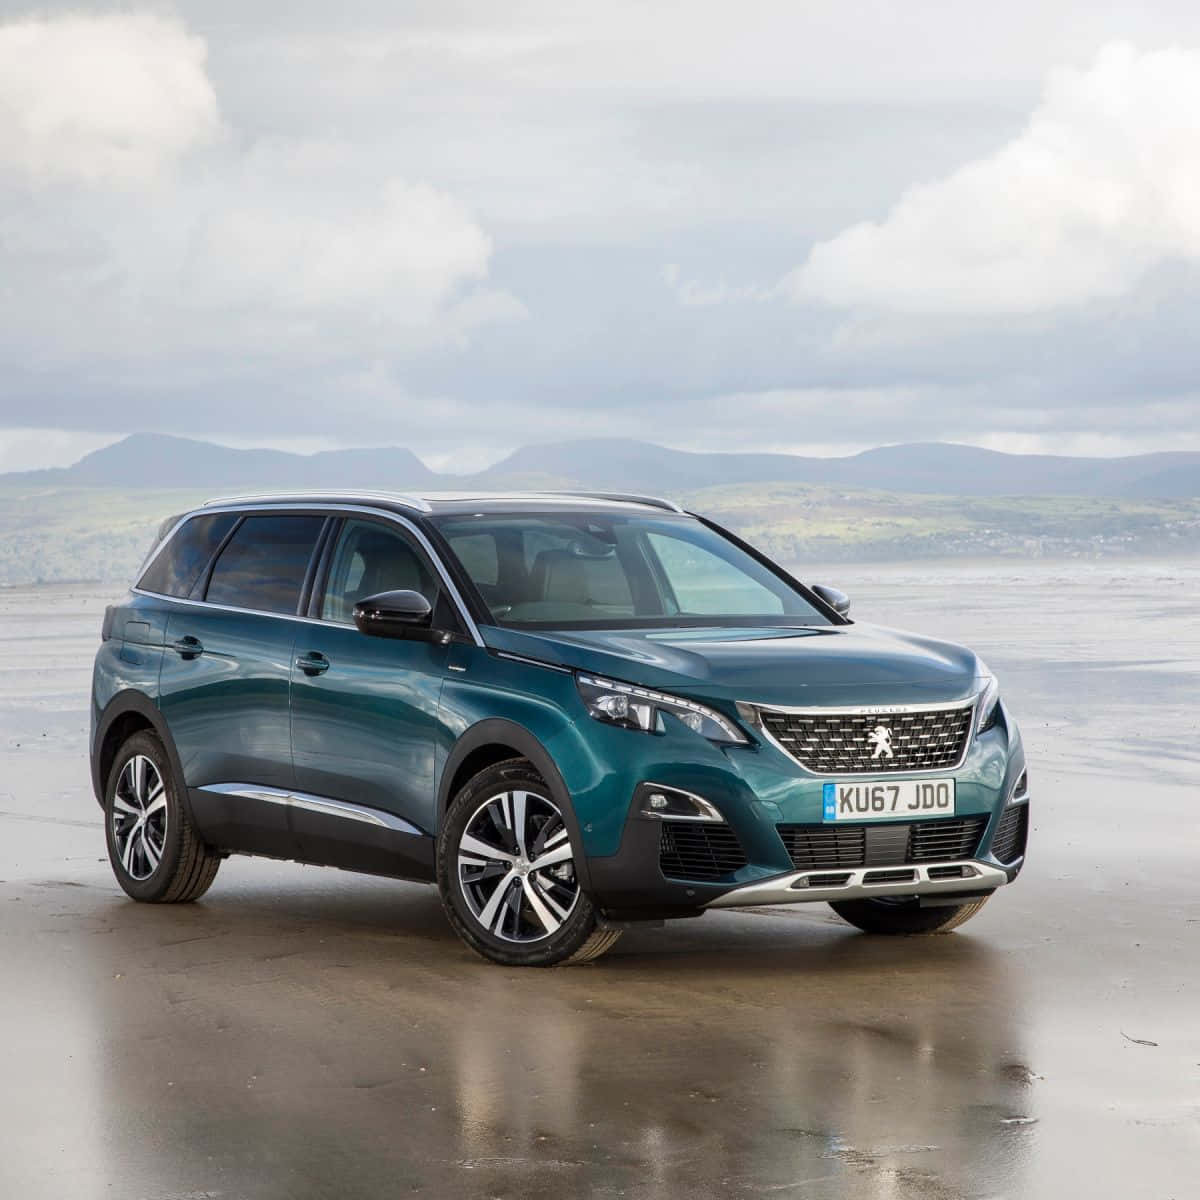 Majestic Peugeot 5008 On The Road Wallpaper